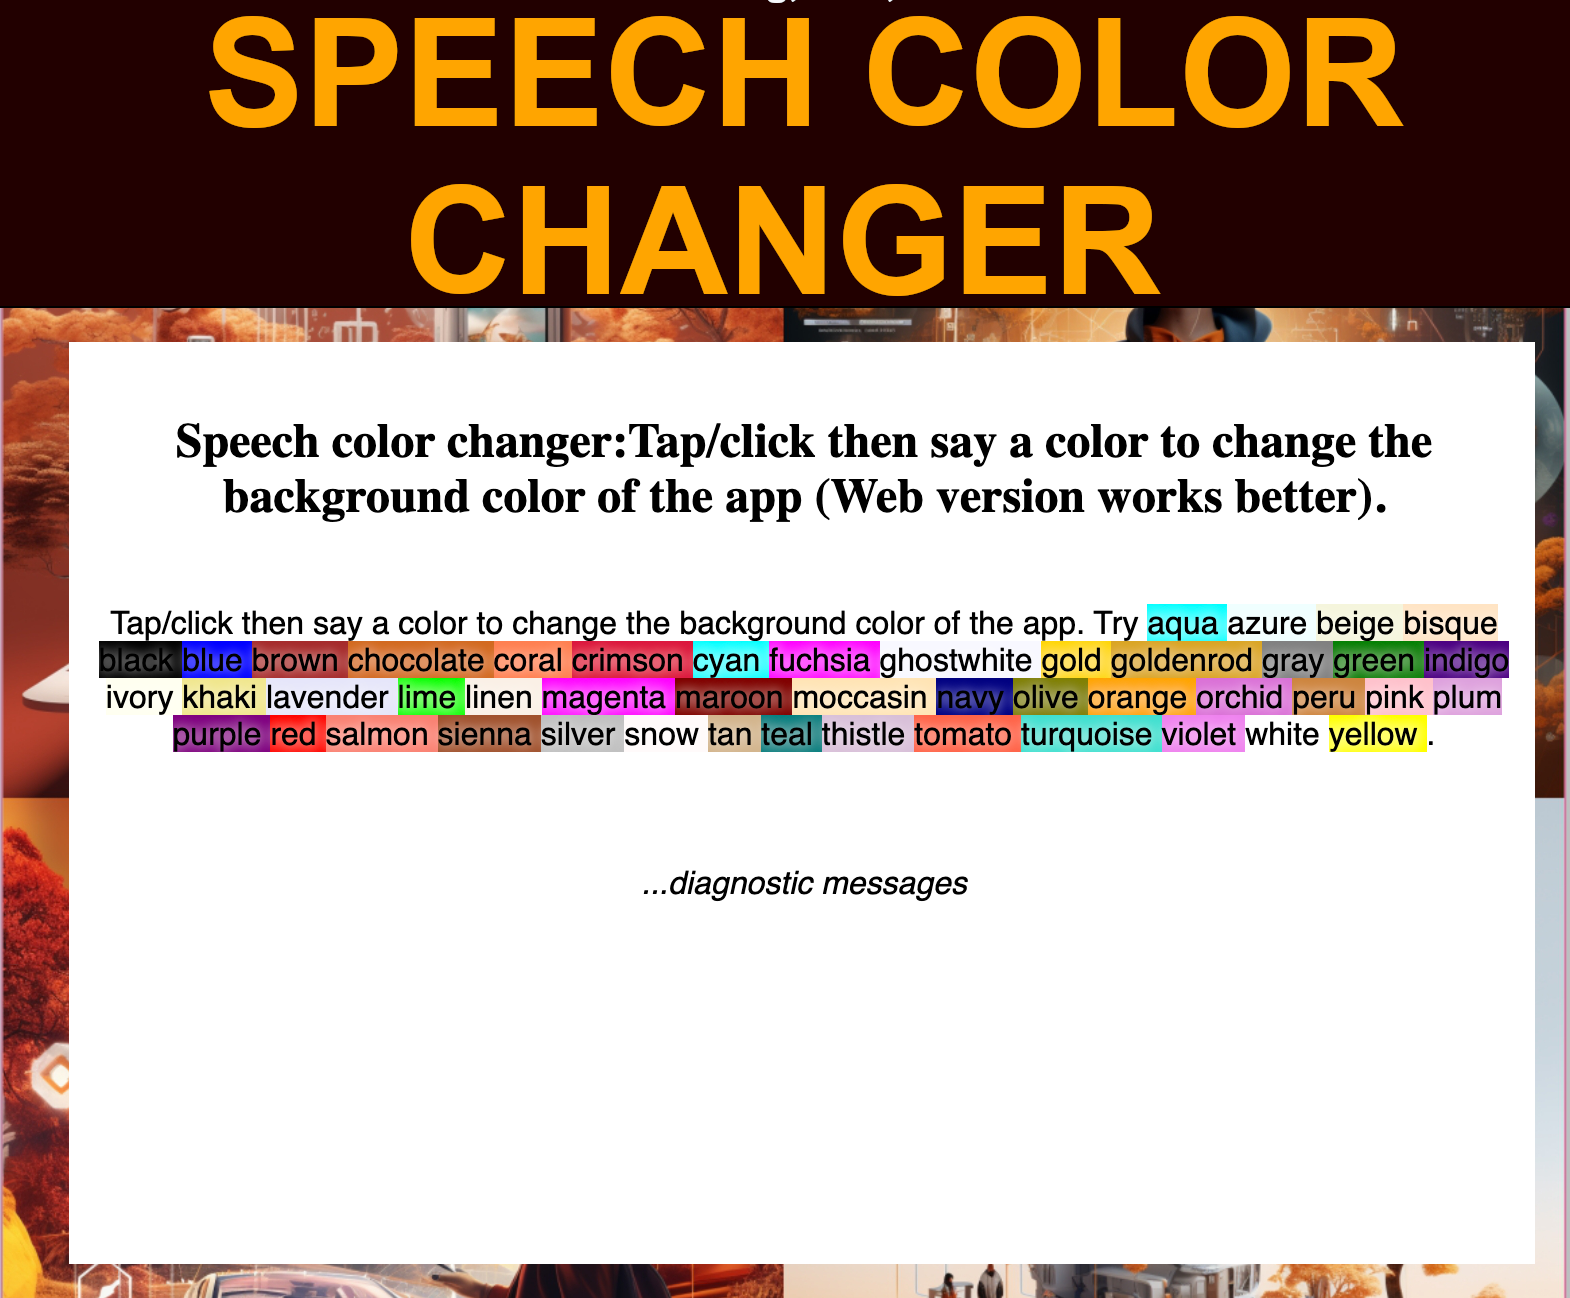 Speech Color Changer: Say the color to change the background